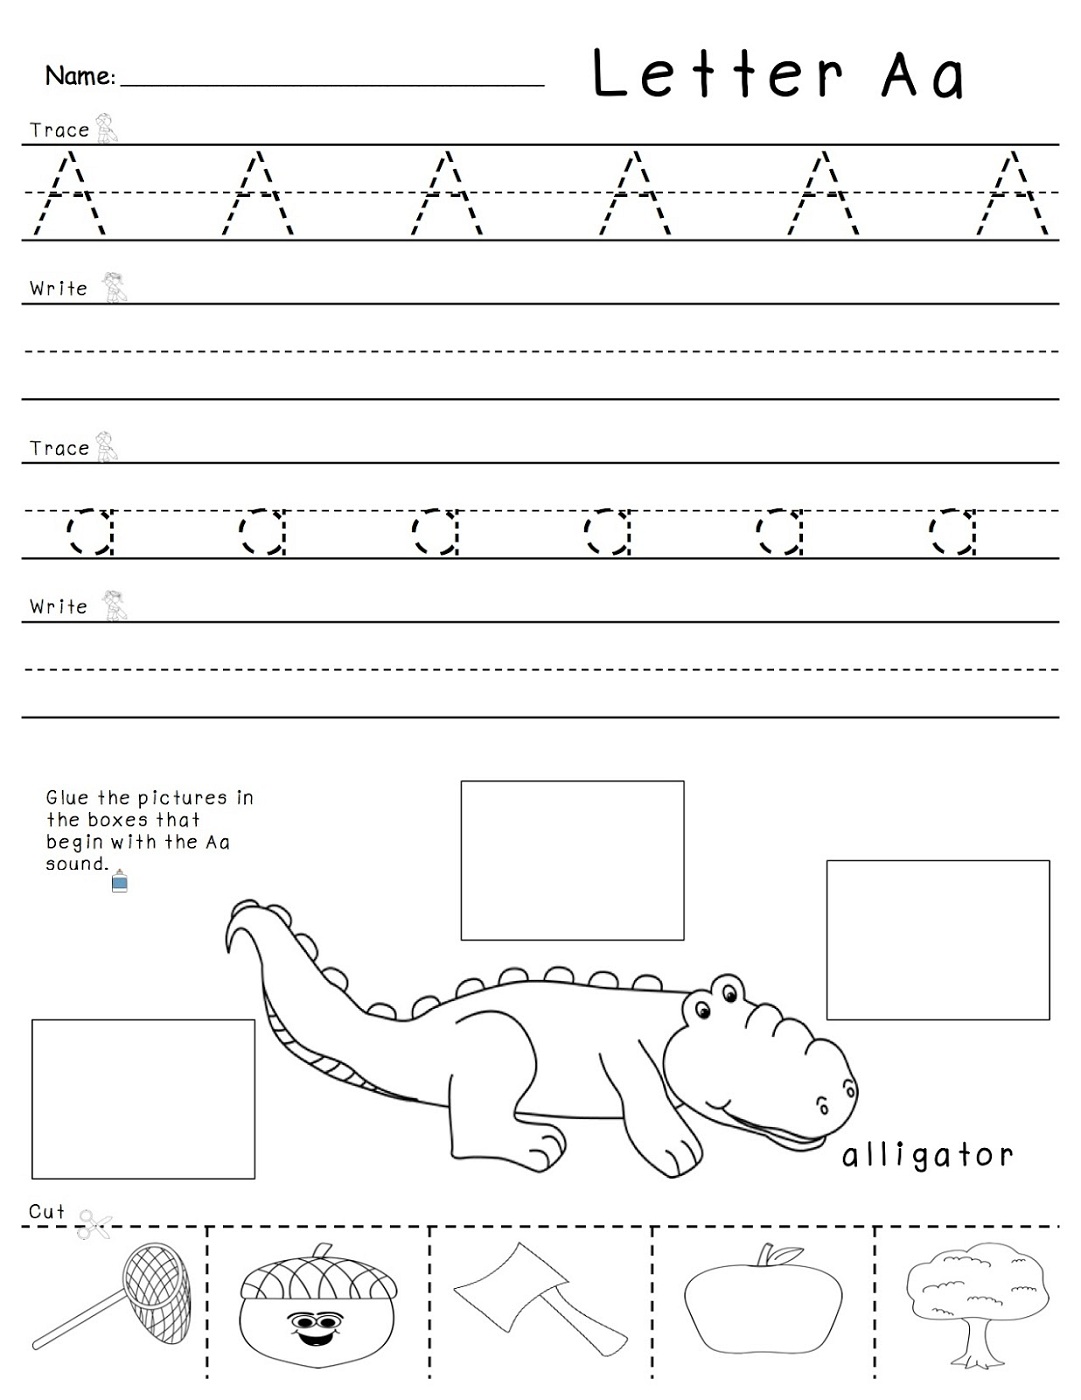 tracing-the-letter-a-free-printable-activity-shelter